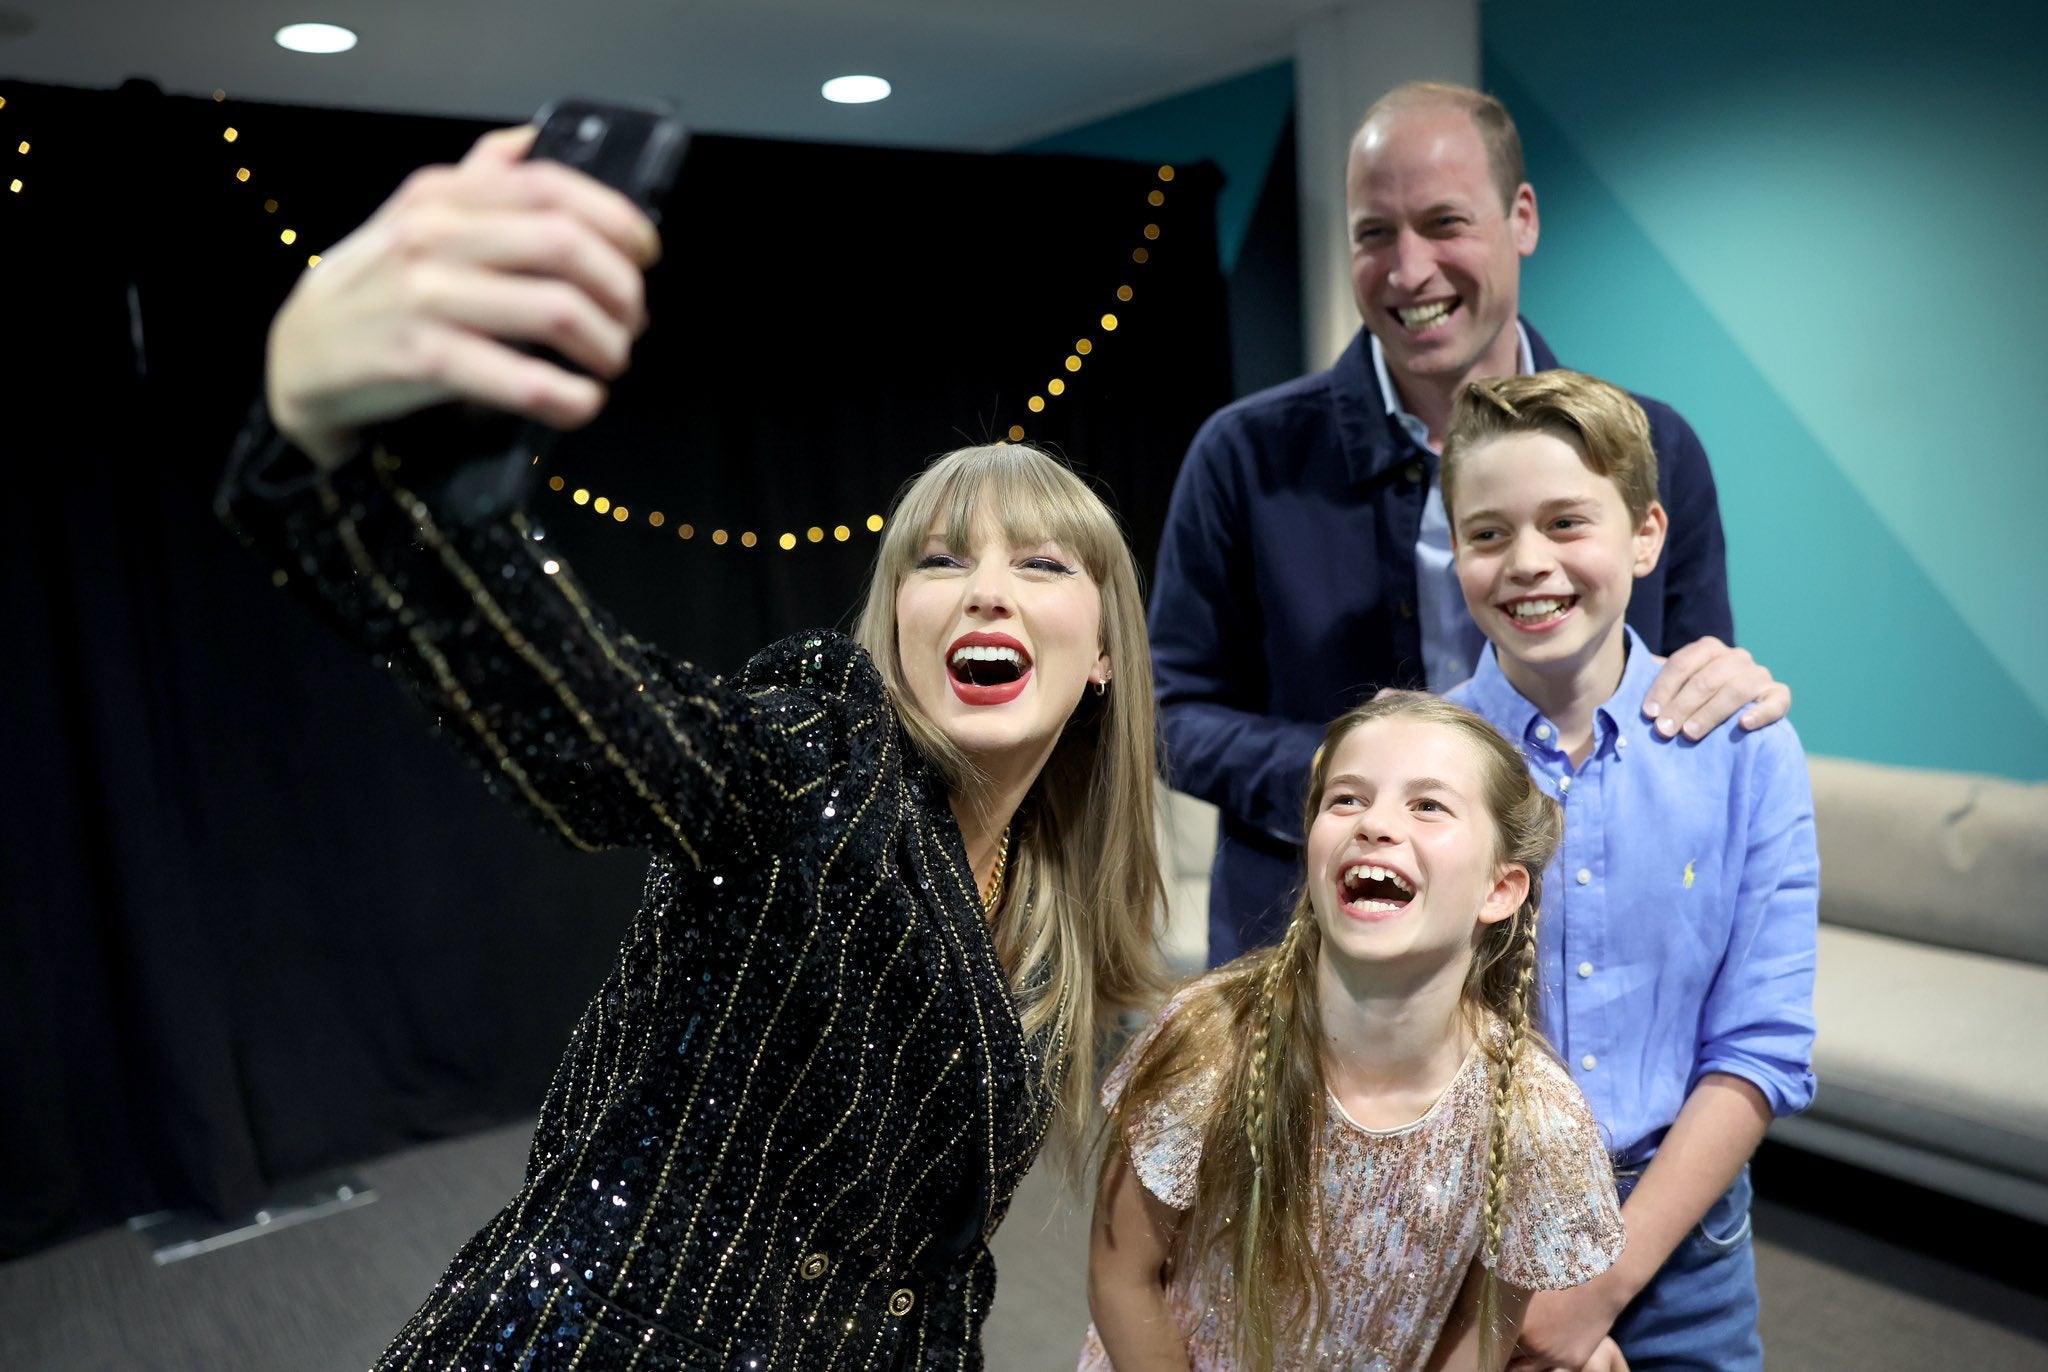 Taylor Swift takes a selfie with Prince William and his children